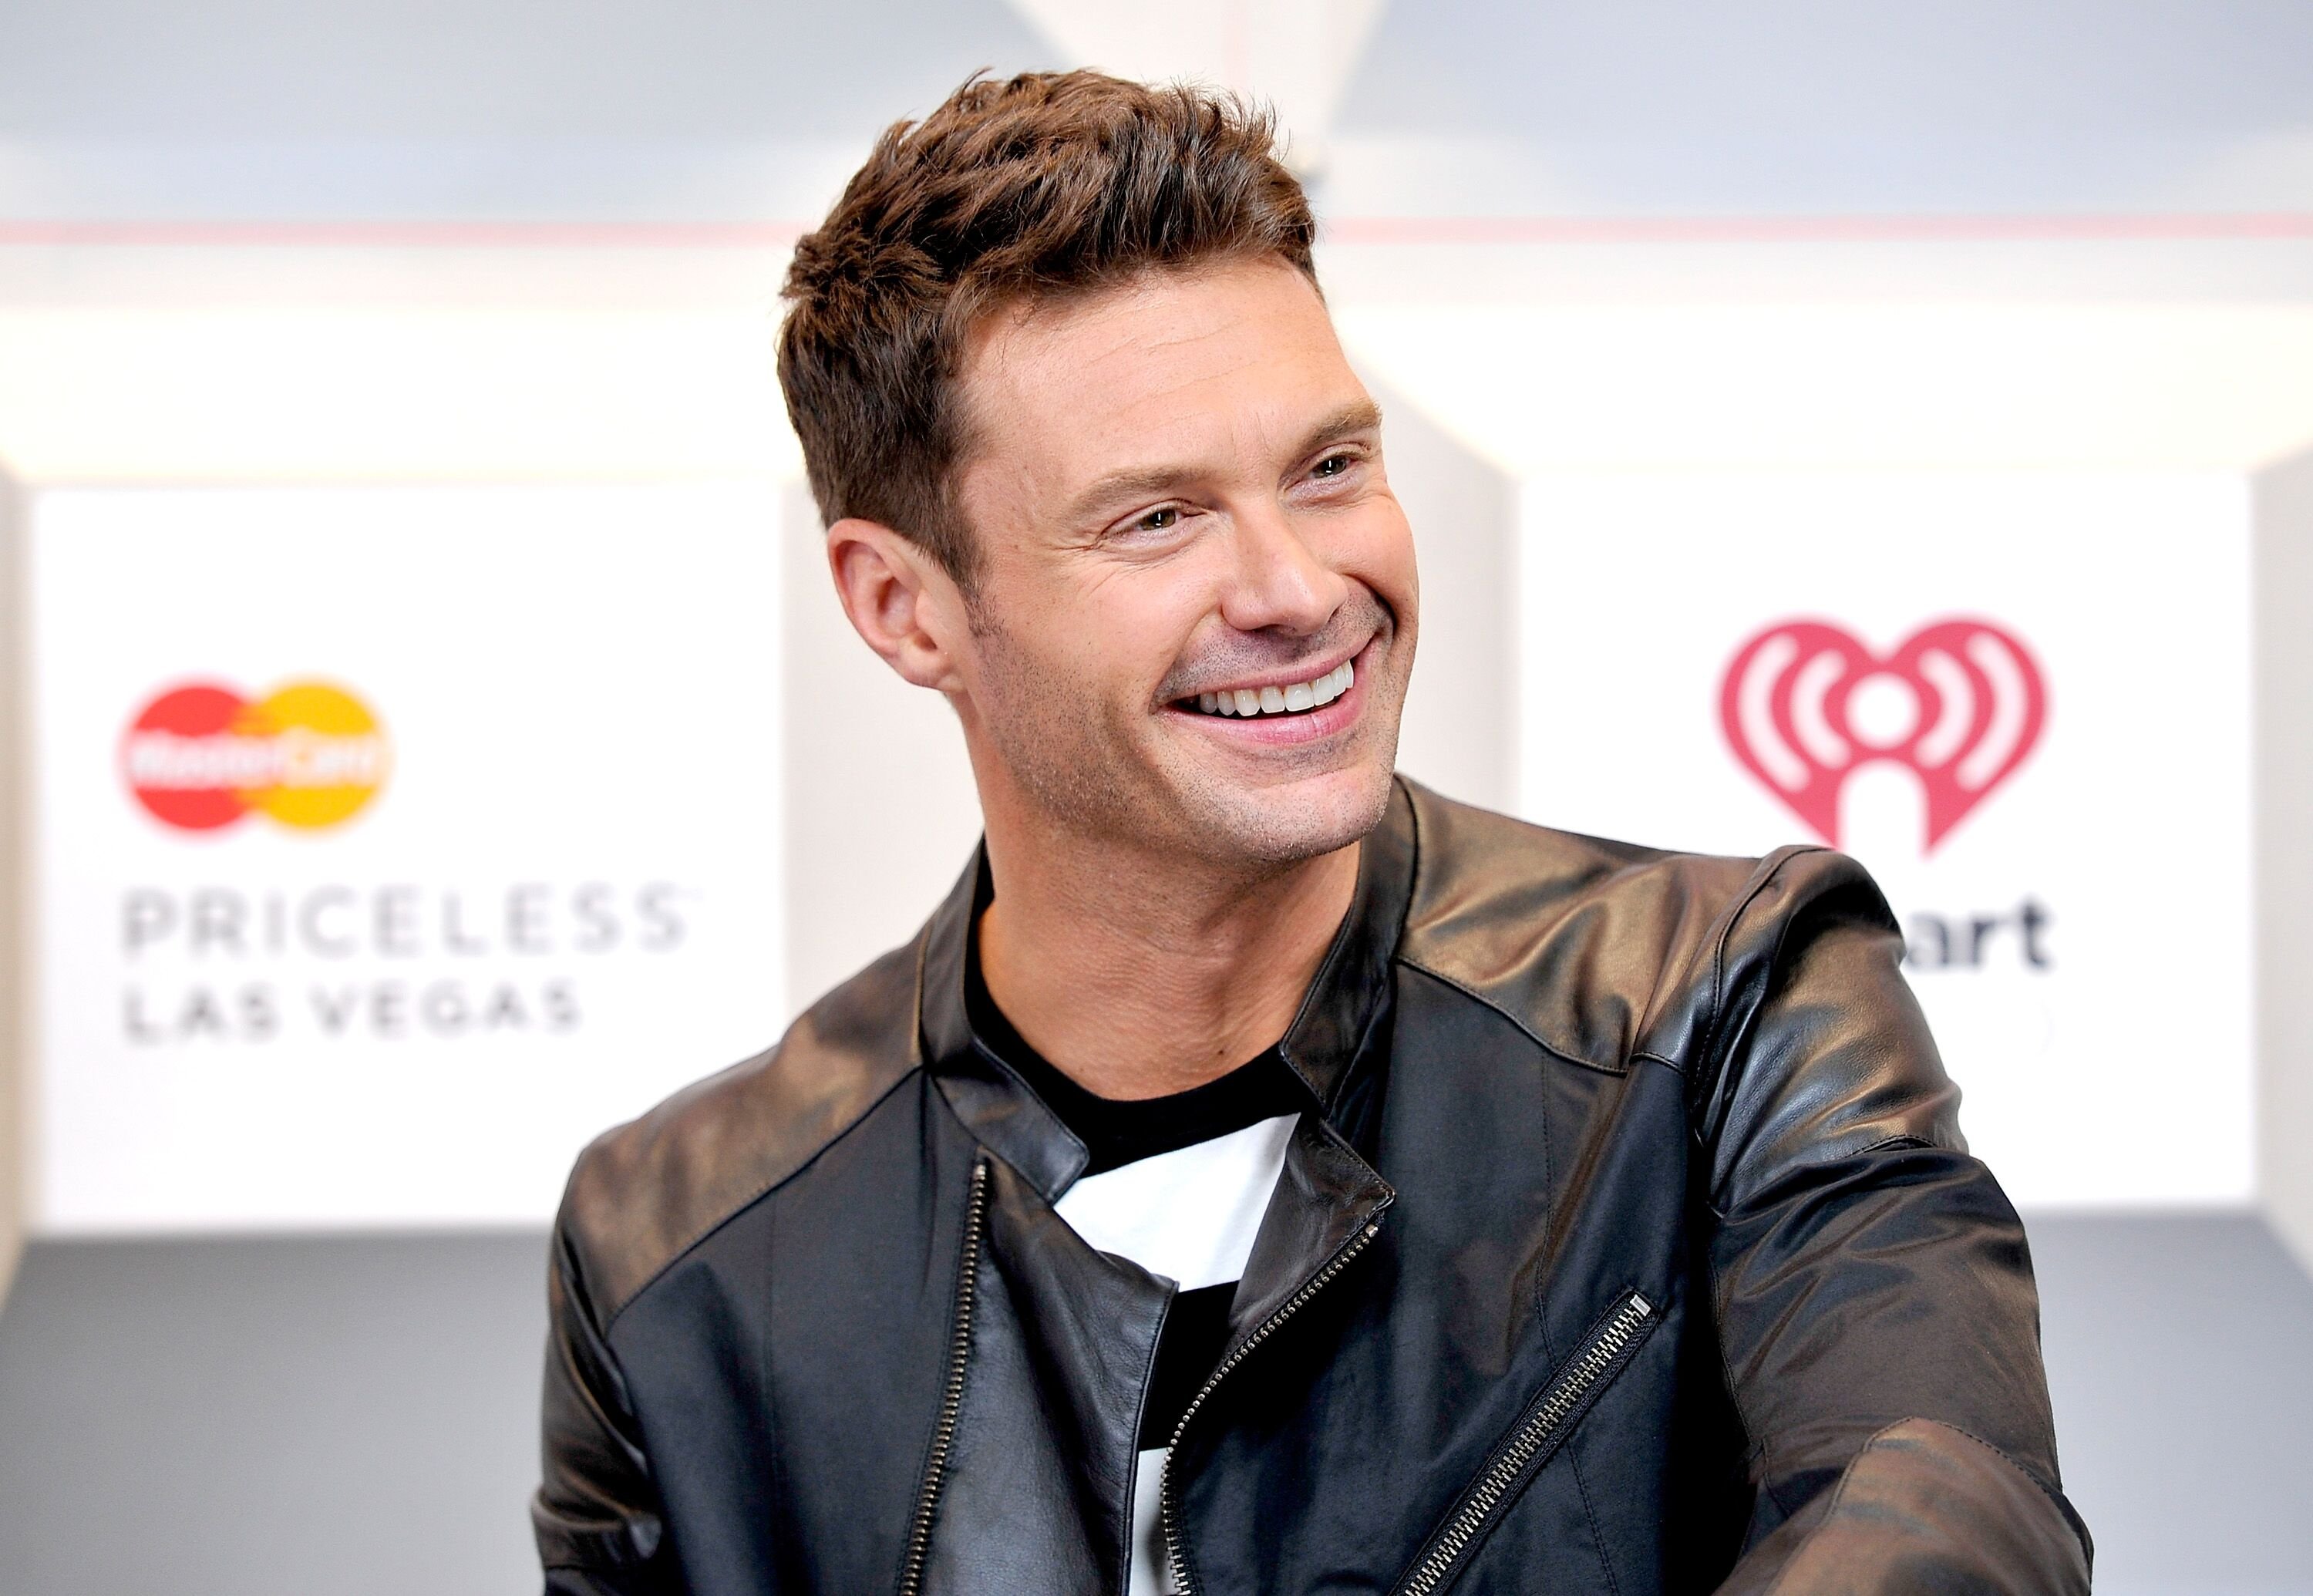 Ryan Seacrest attends the 2014 iHeartRadio Music Festival at the MGM Grand Garden Arena on September 19, 2014 in Las Vegas, Nevada. | Source: Getty Images